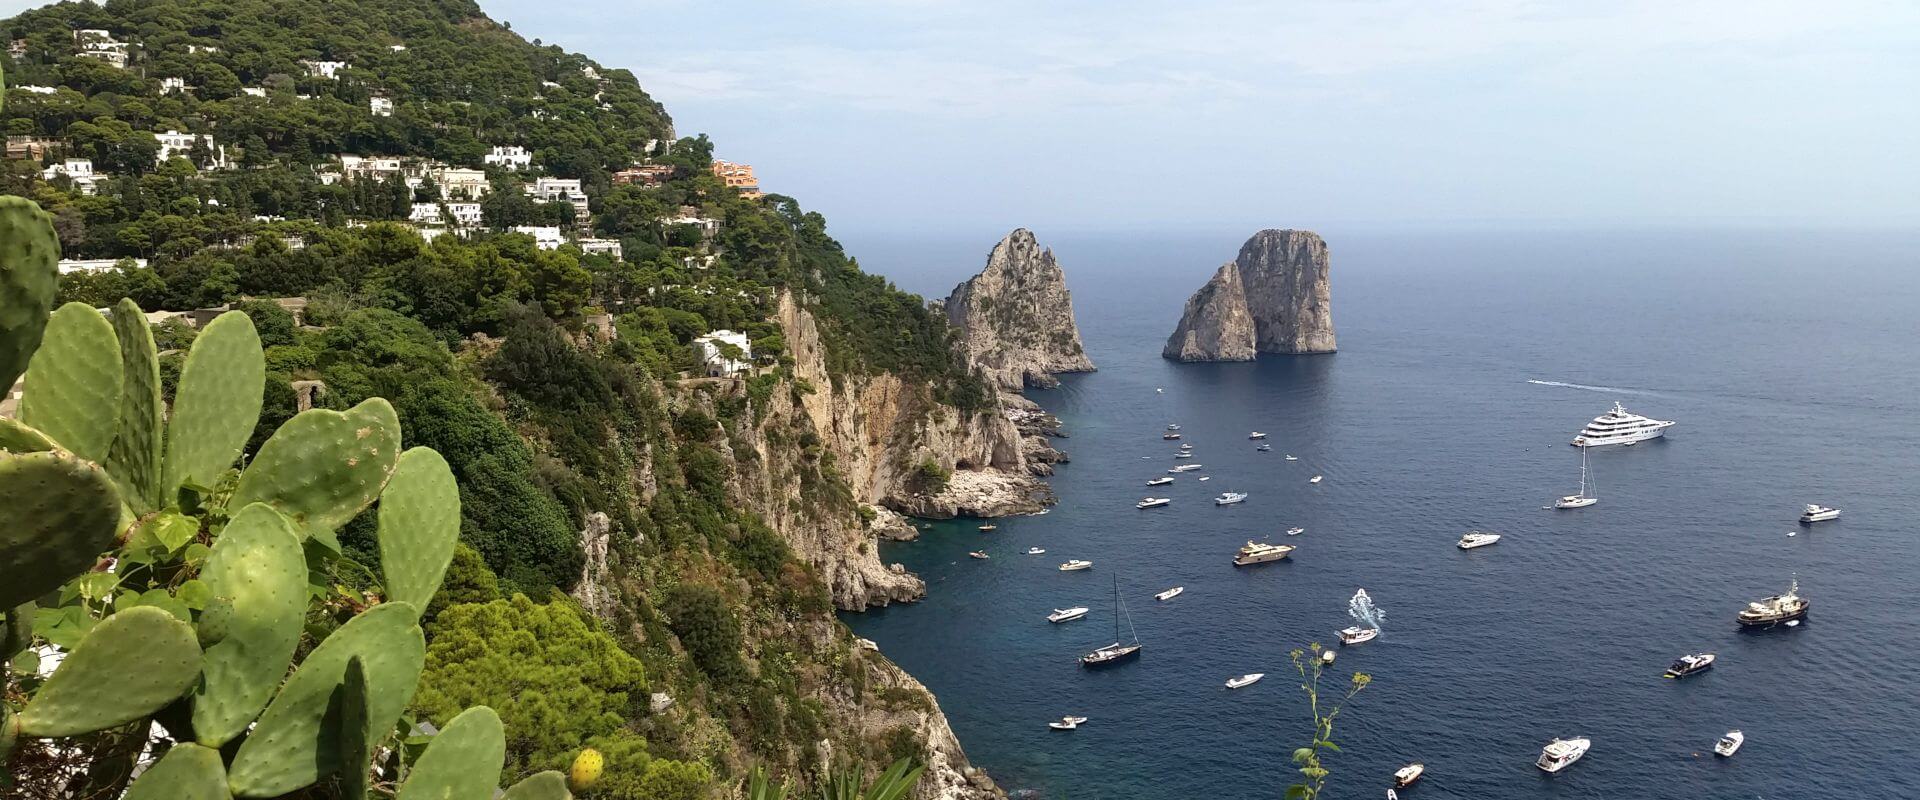 The view of Capri from the top